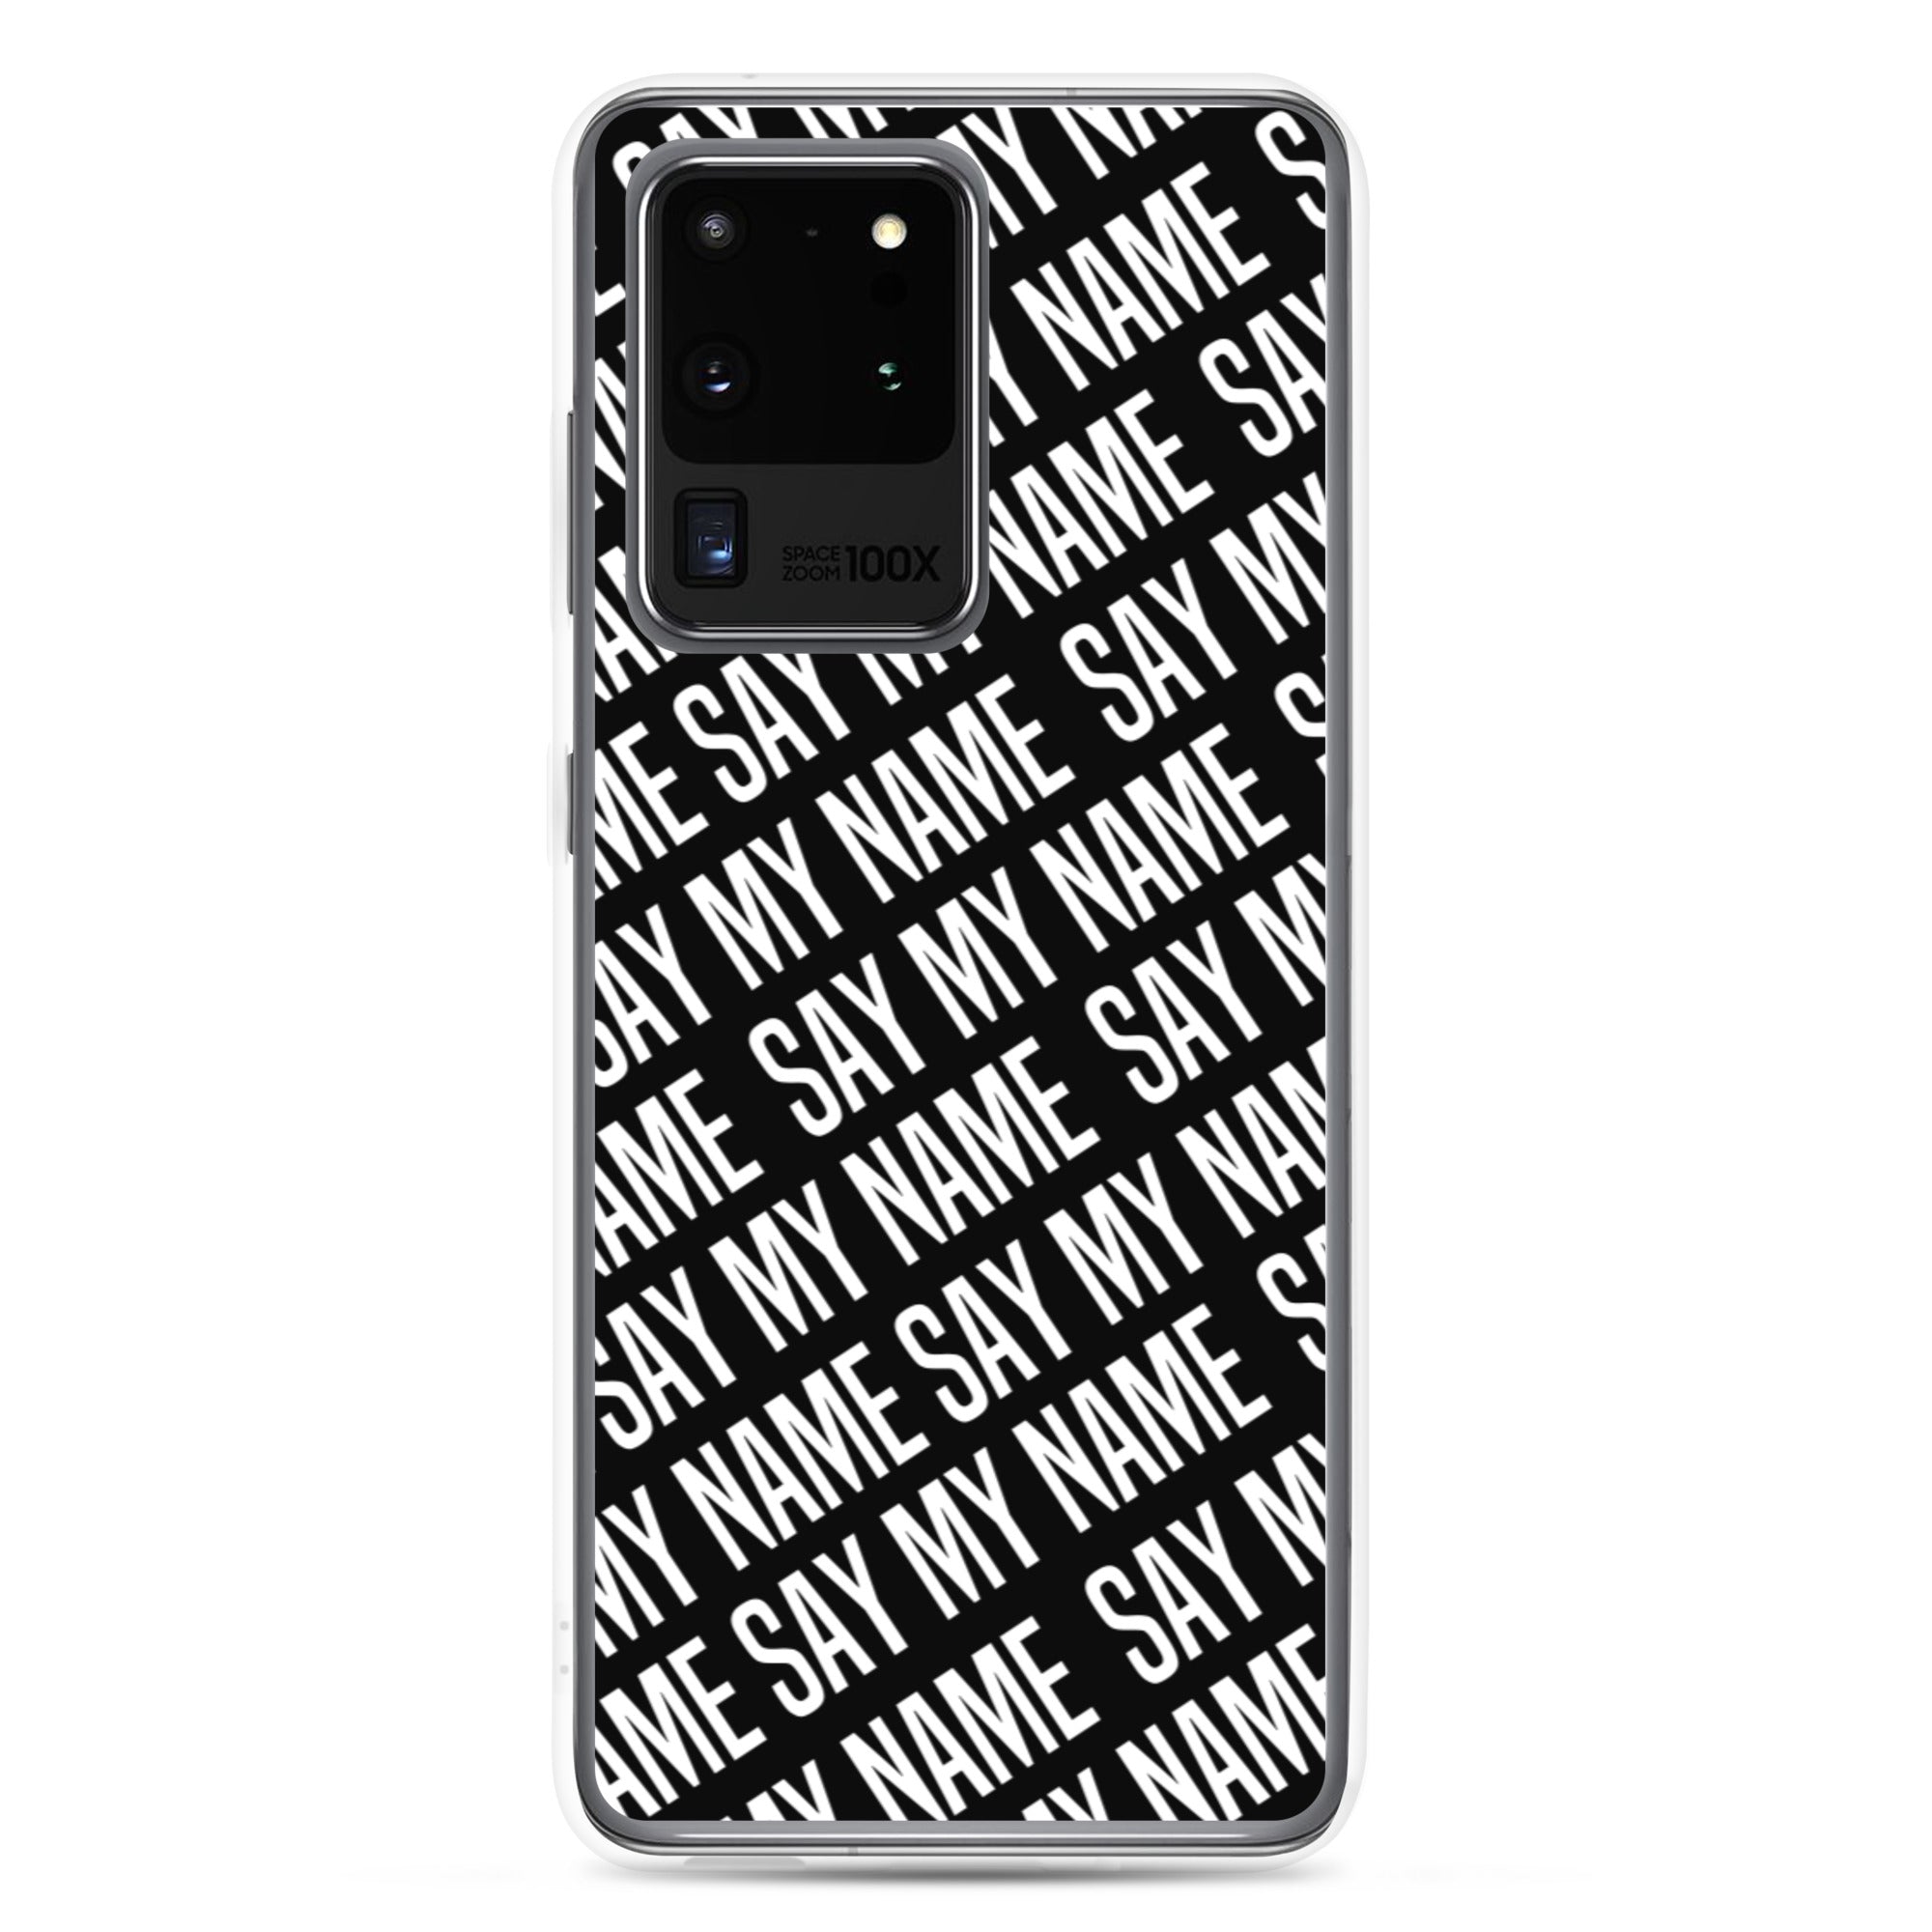 SAY MY NAME Samsung case